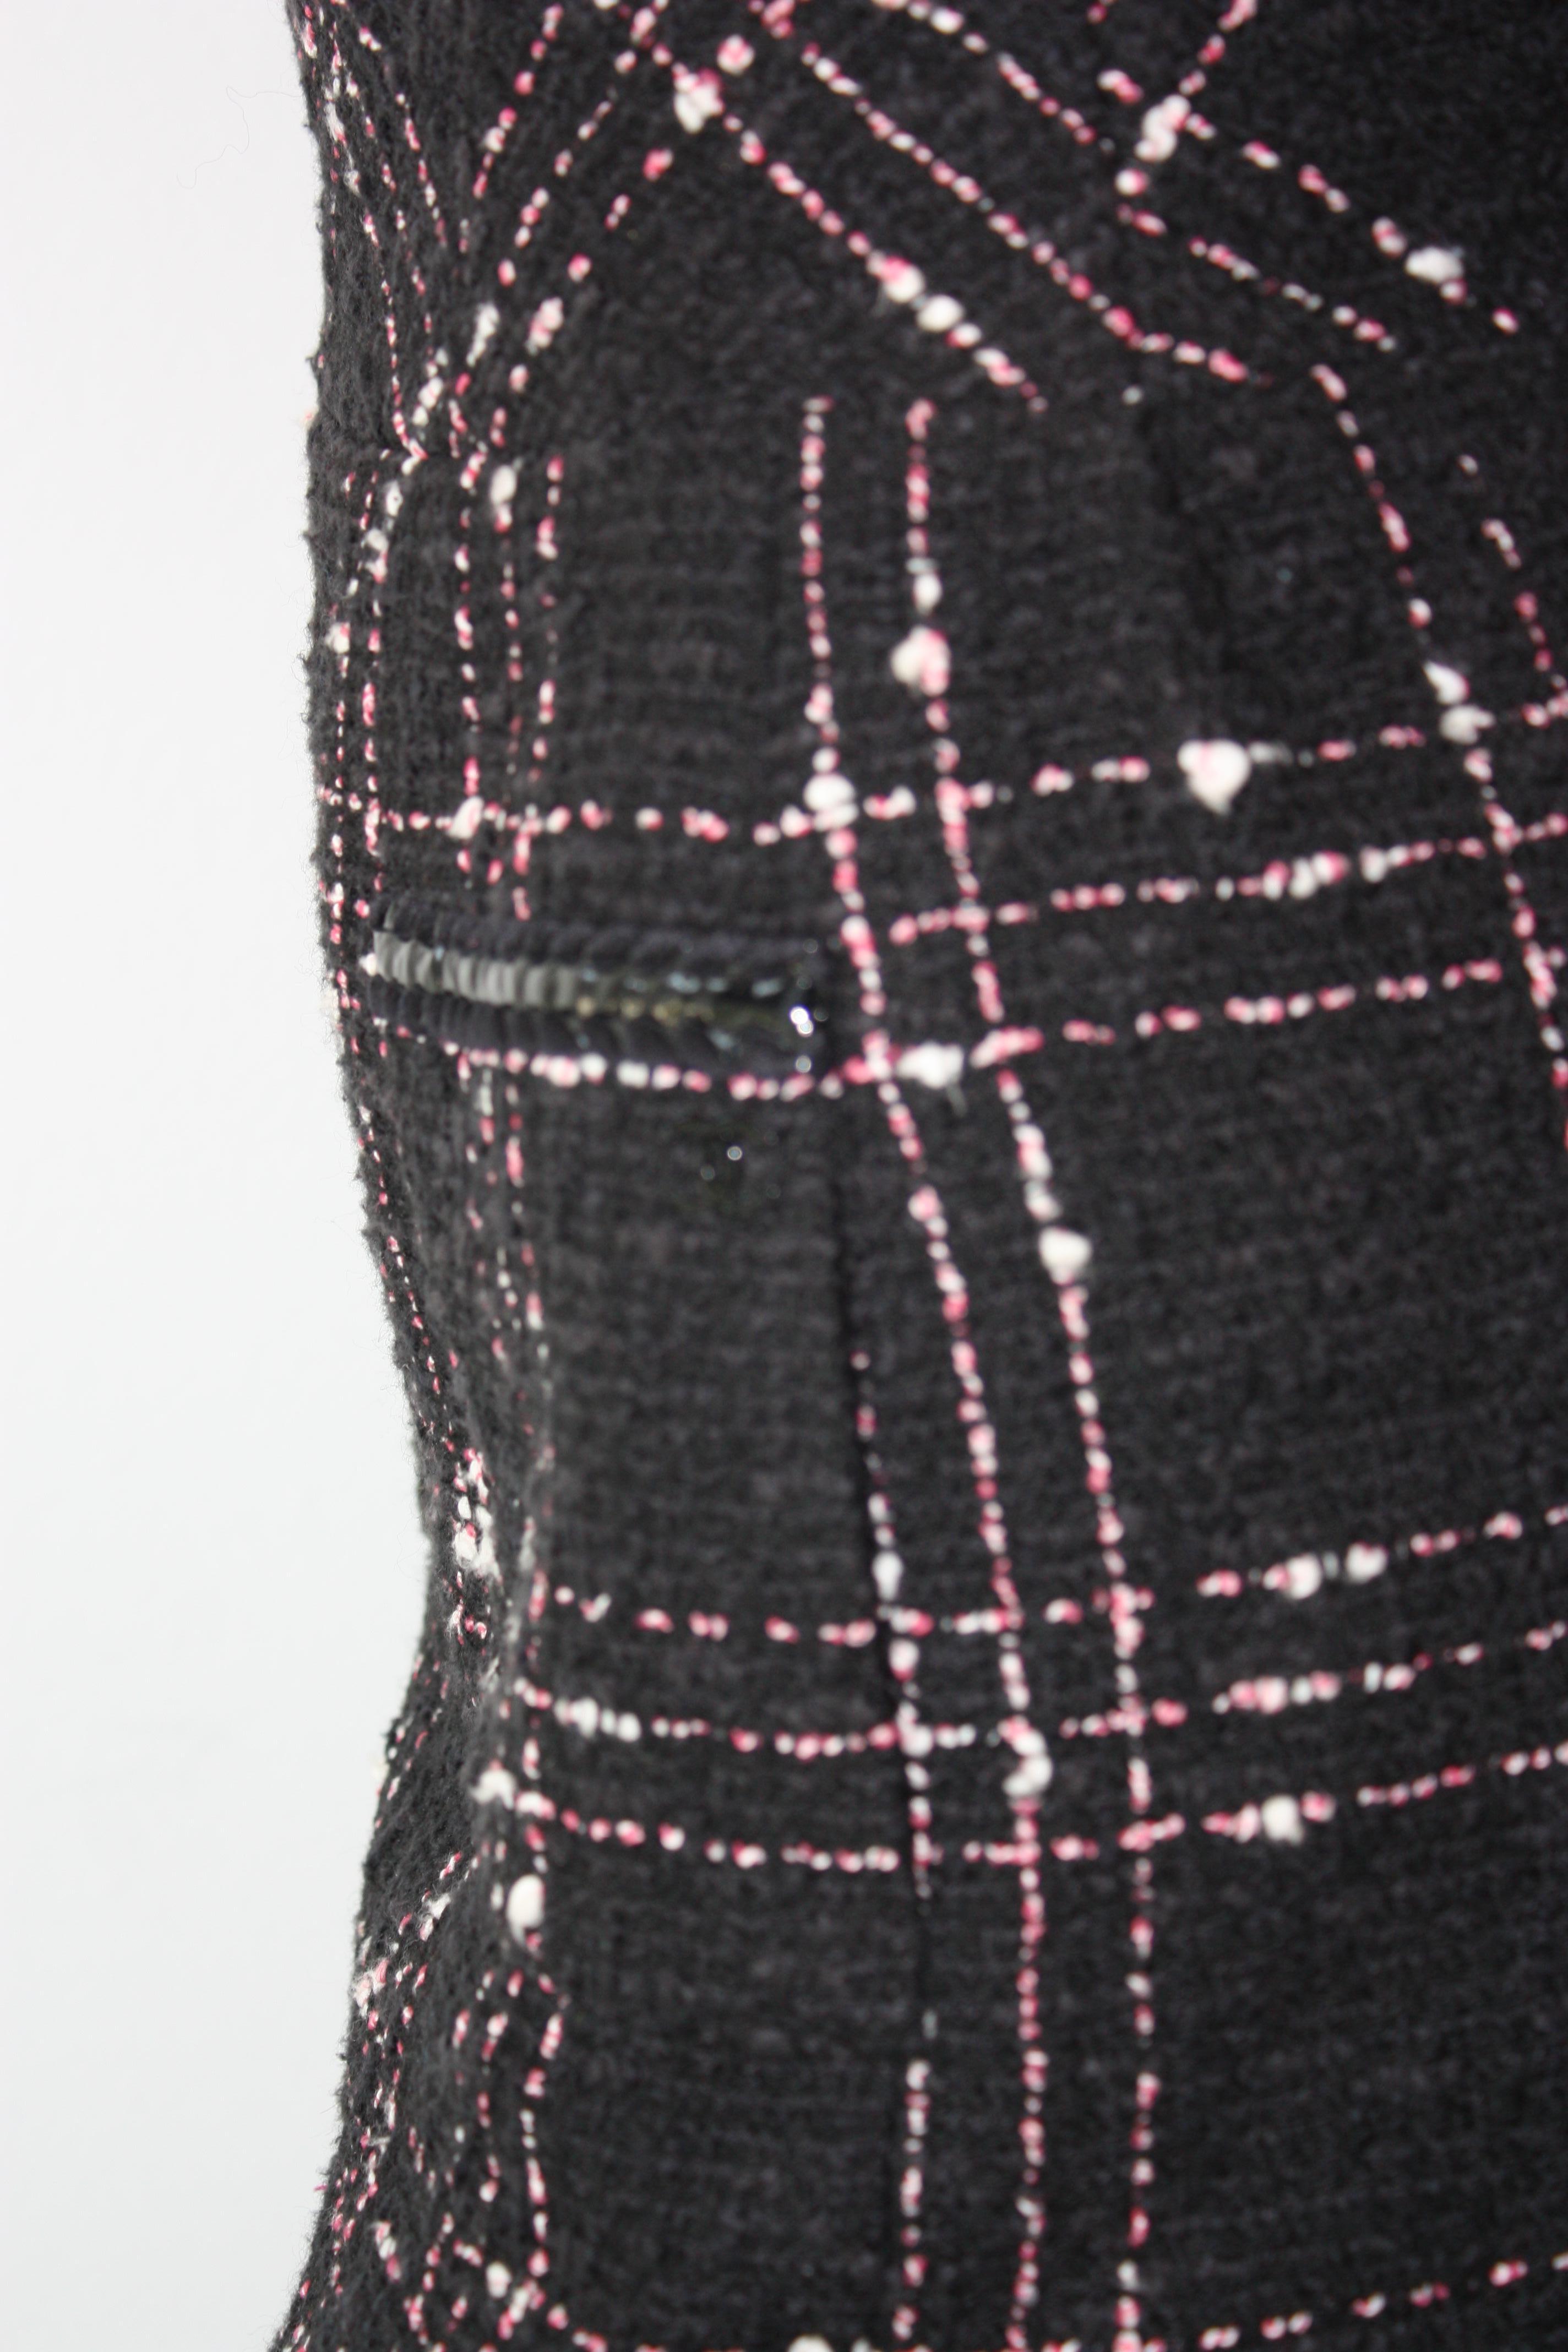 Chanel High Waisted Black, White and Pink  Plaid Skirt In Excellent Condition For Sale In Thousand Oaks, CA